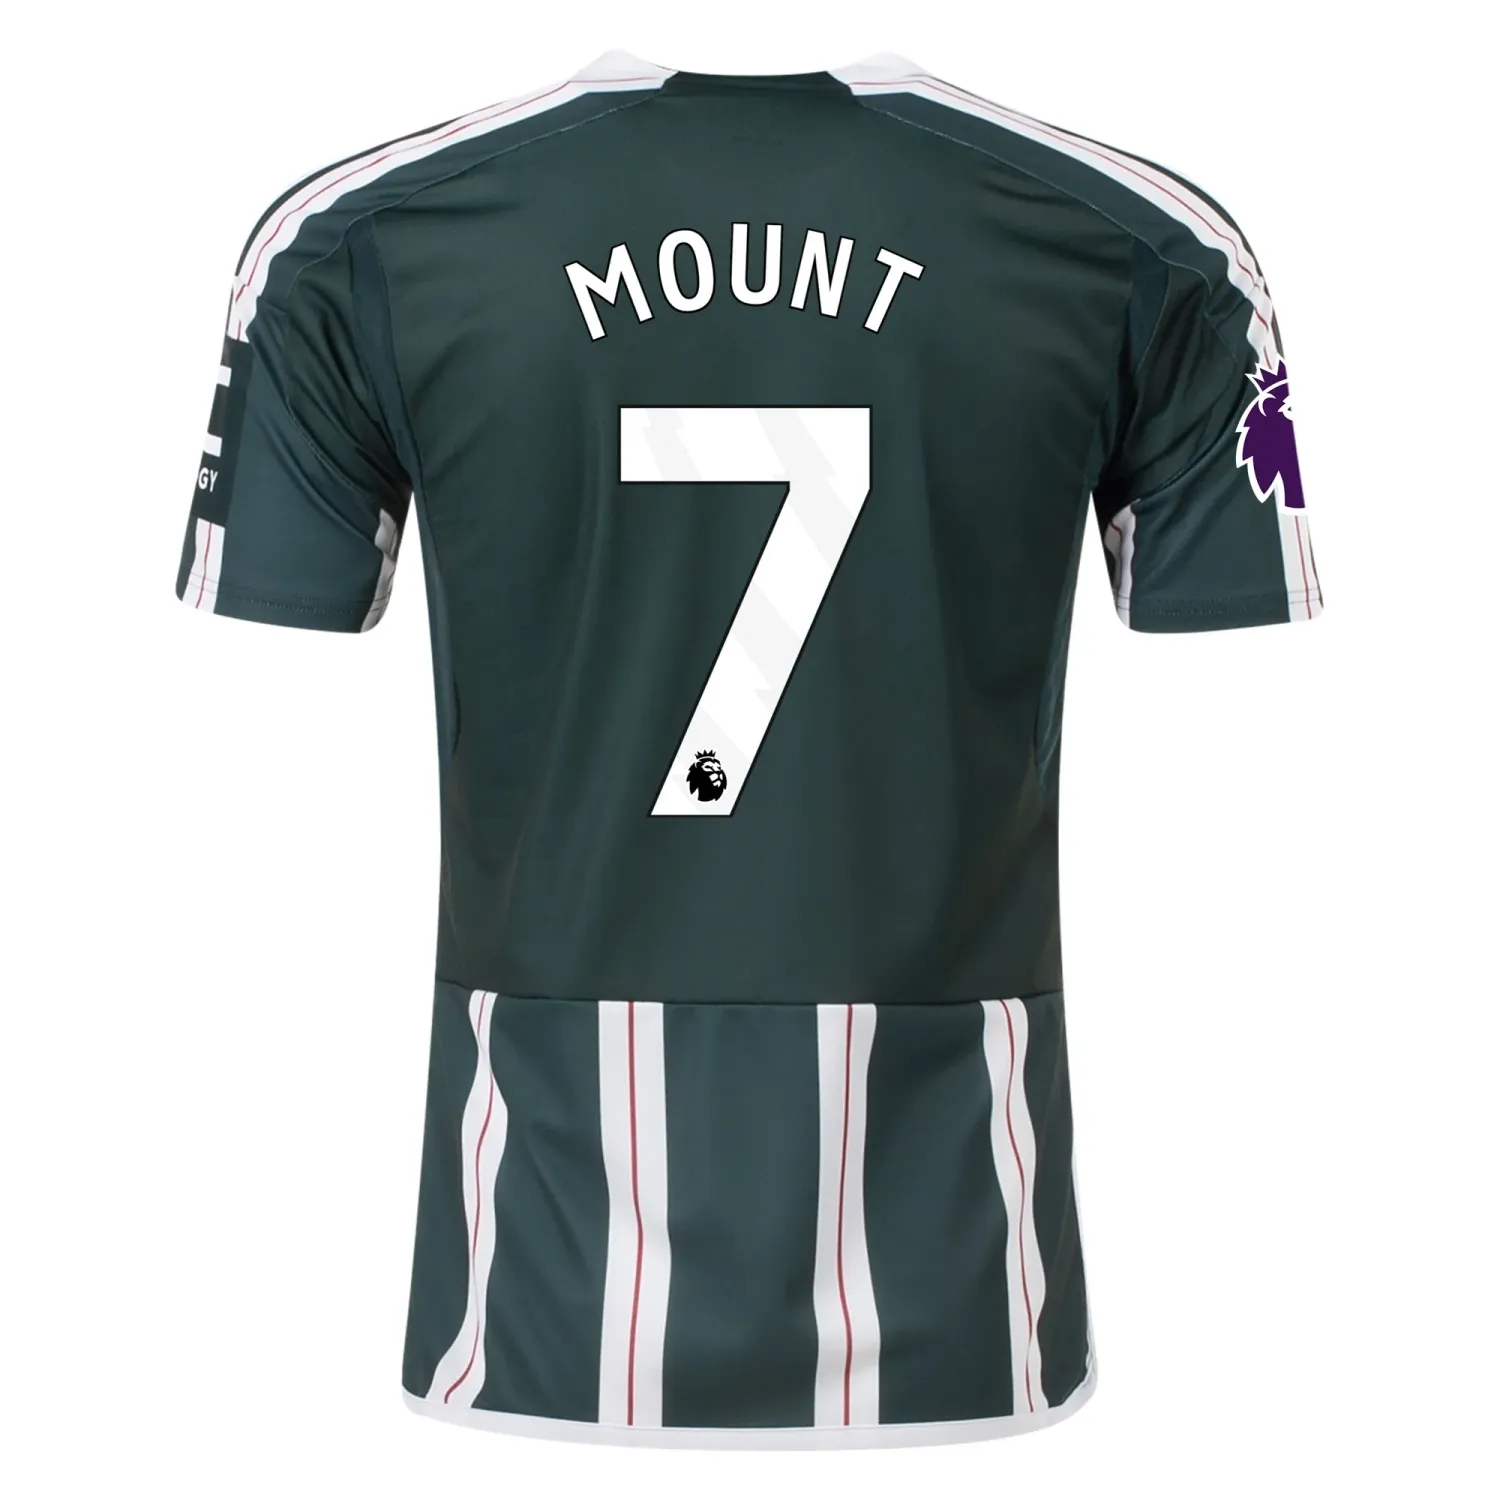 MOUNT Manchester United 23/24 Away Jersey for Men